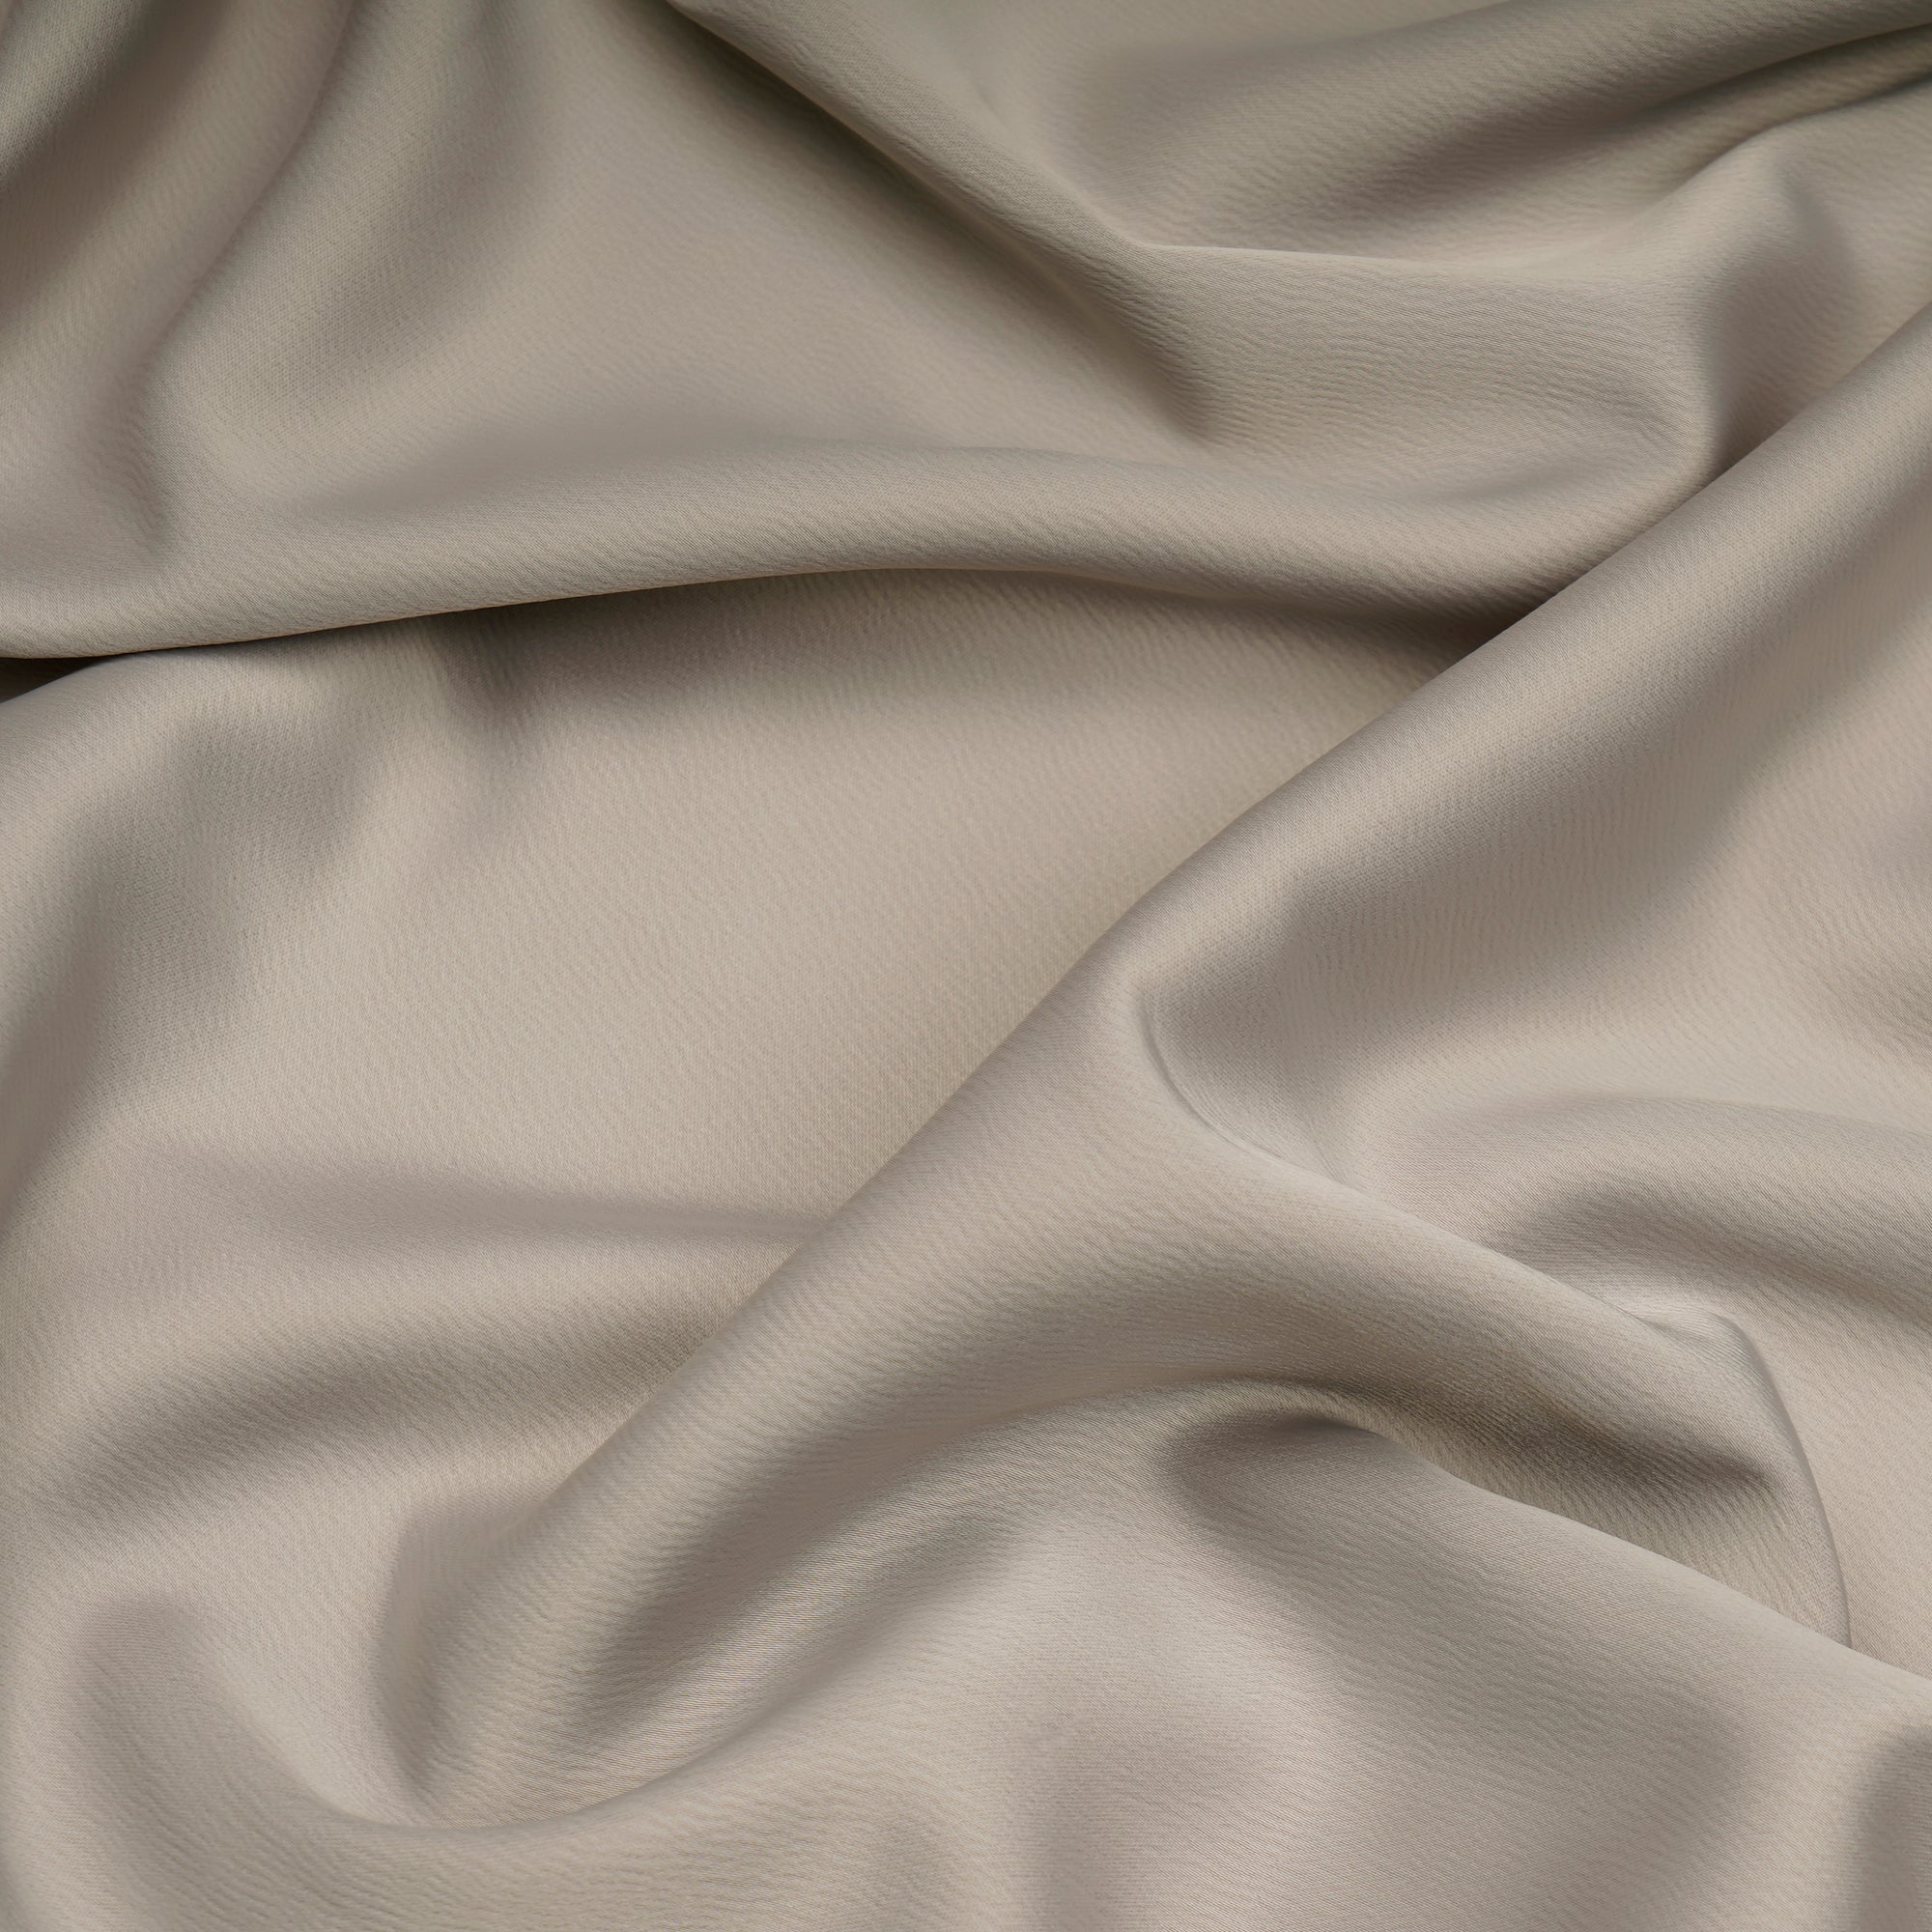 Silver Lining Solid Dyed Imported Crunchy Satin Fabric (60" Width)